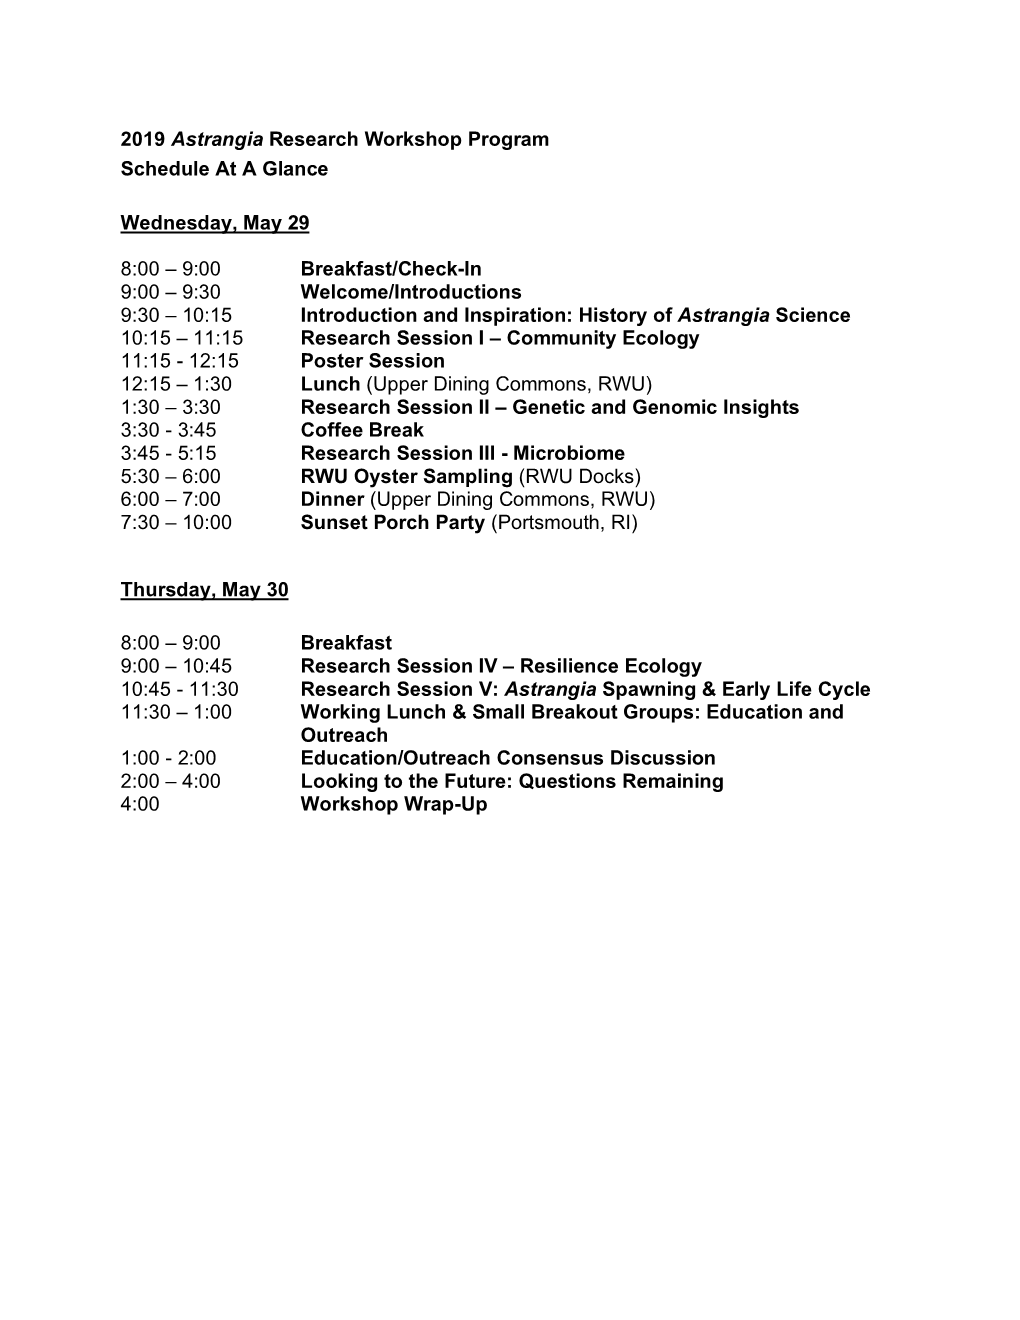 2019 Astrangia Research Workshop Program Schedule at a Glance Wednesday, May 29 8:00 – 9:00 Breakfast/Check-In 9:00 – 9:30